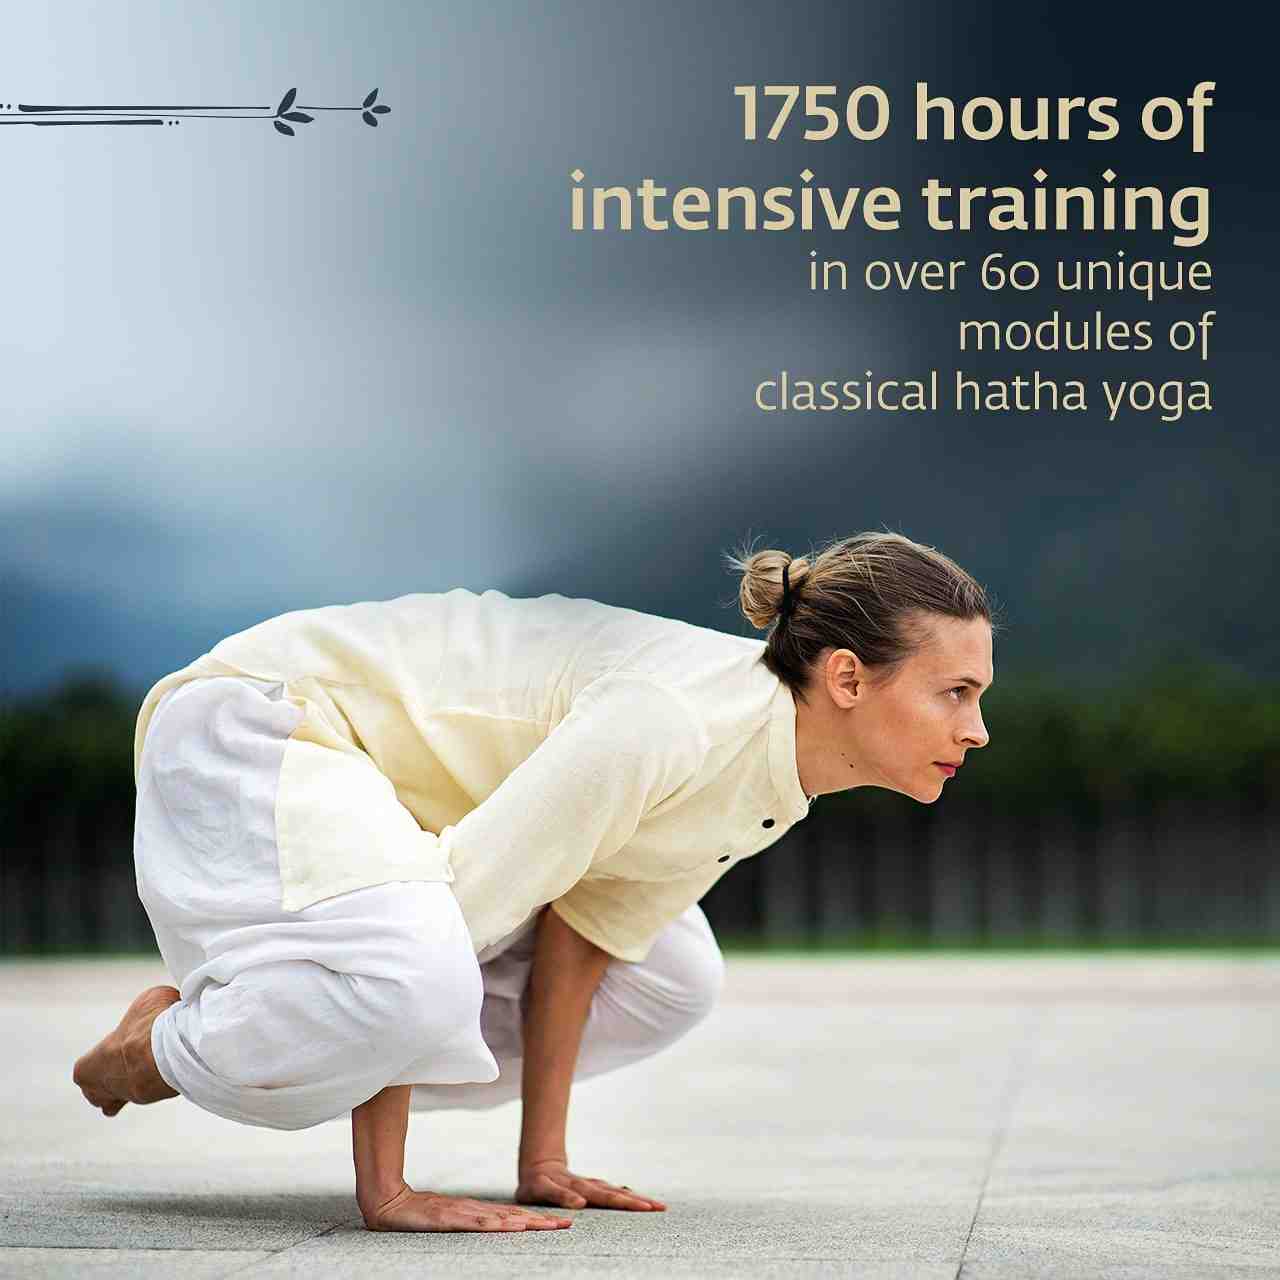 How many poses are there in Hatha yoga?